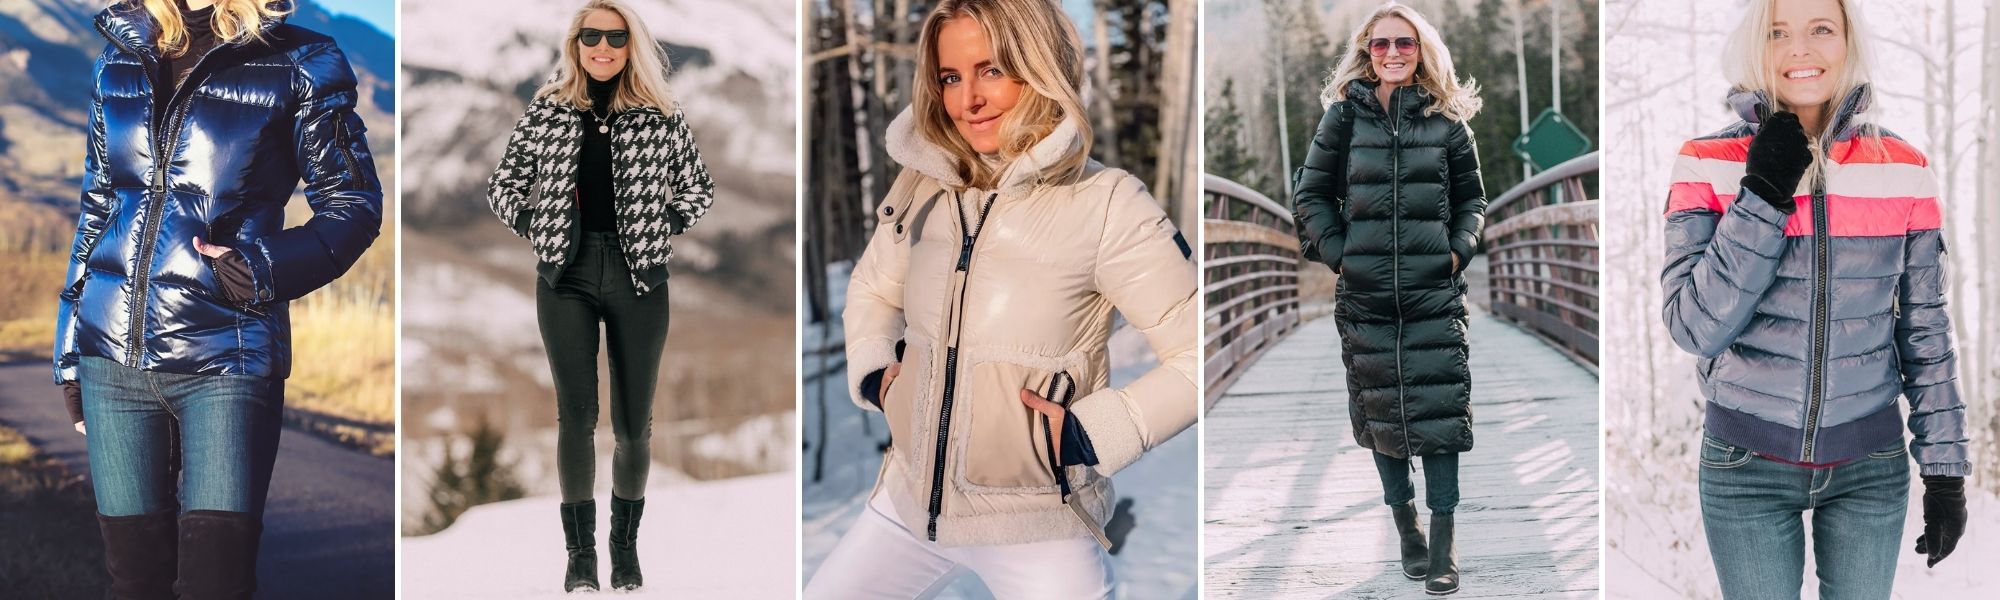 must-have winter coats, must have winter jackets, winter coat trends 2022, best winter coats 2022, best winter jacket, warm winter coats, warm winter jackets, best winter jackets for extreme cold, best winter coats for women